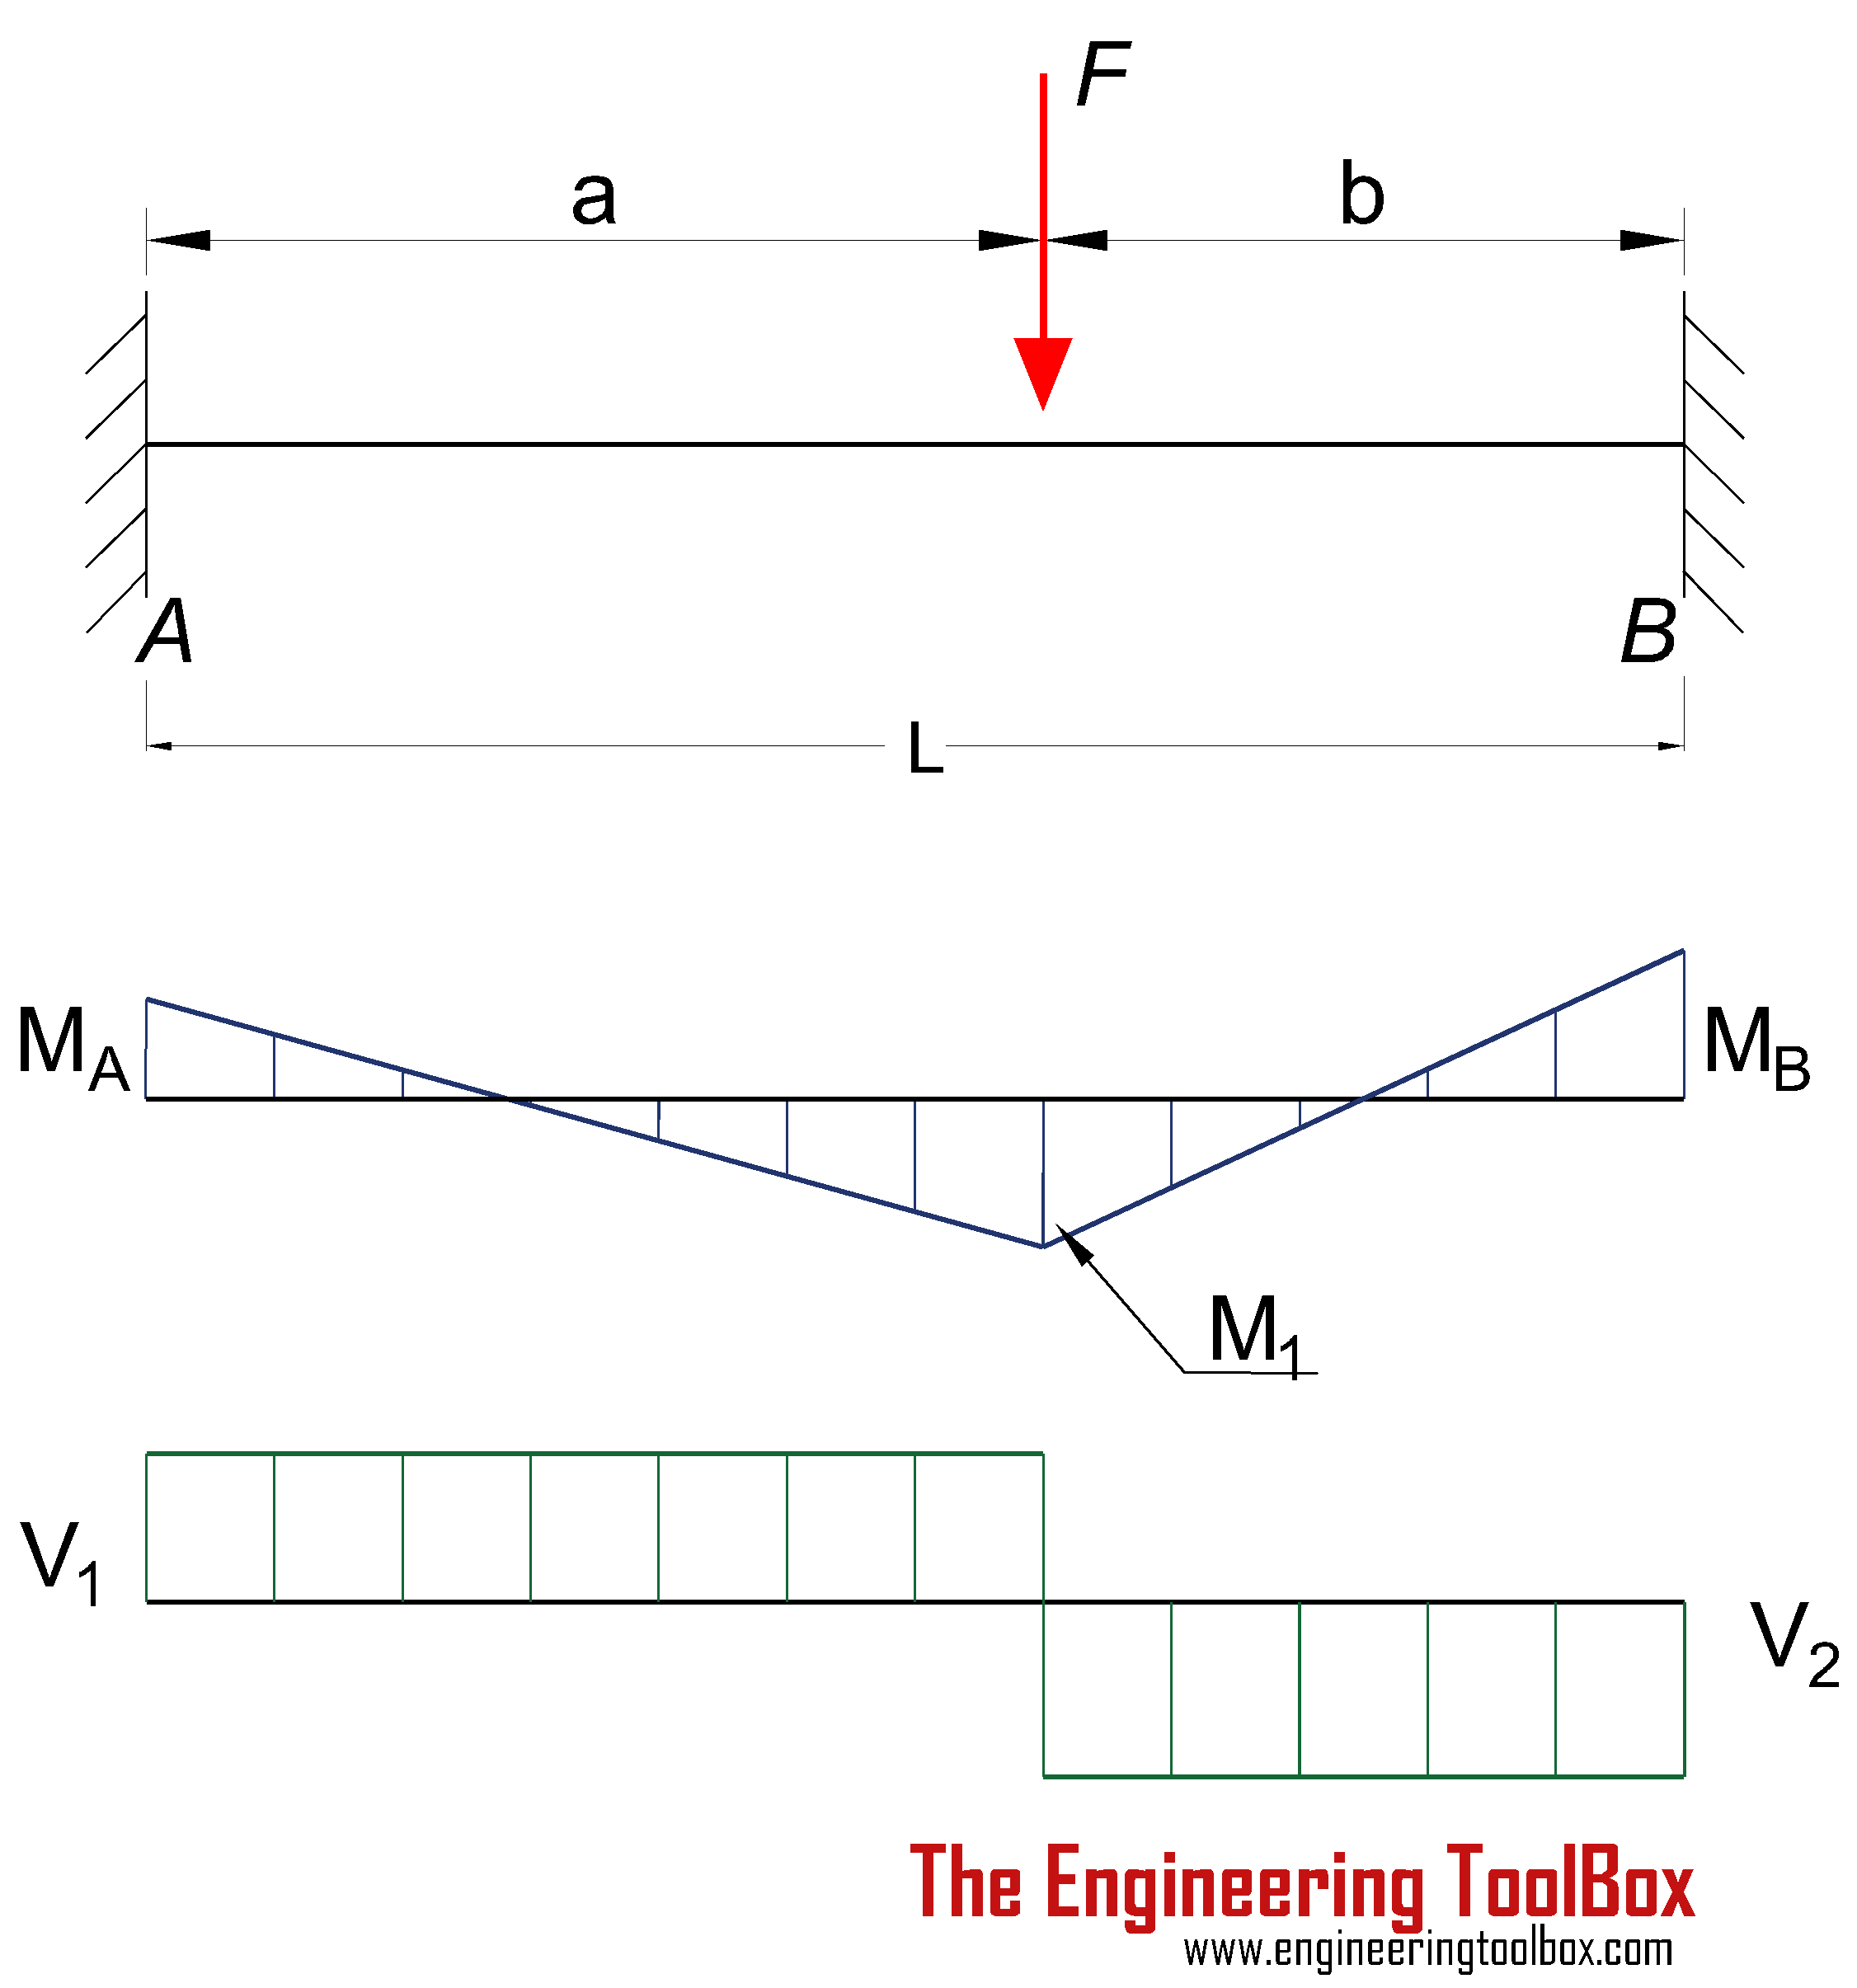 Bending Moment Diagram Beams Fixed At Both Ends Continuous And Point Loads